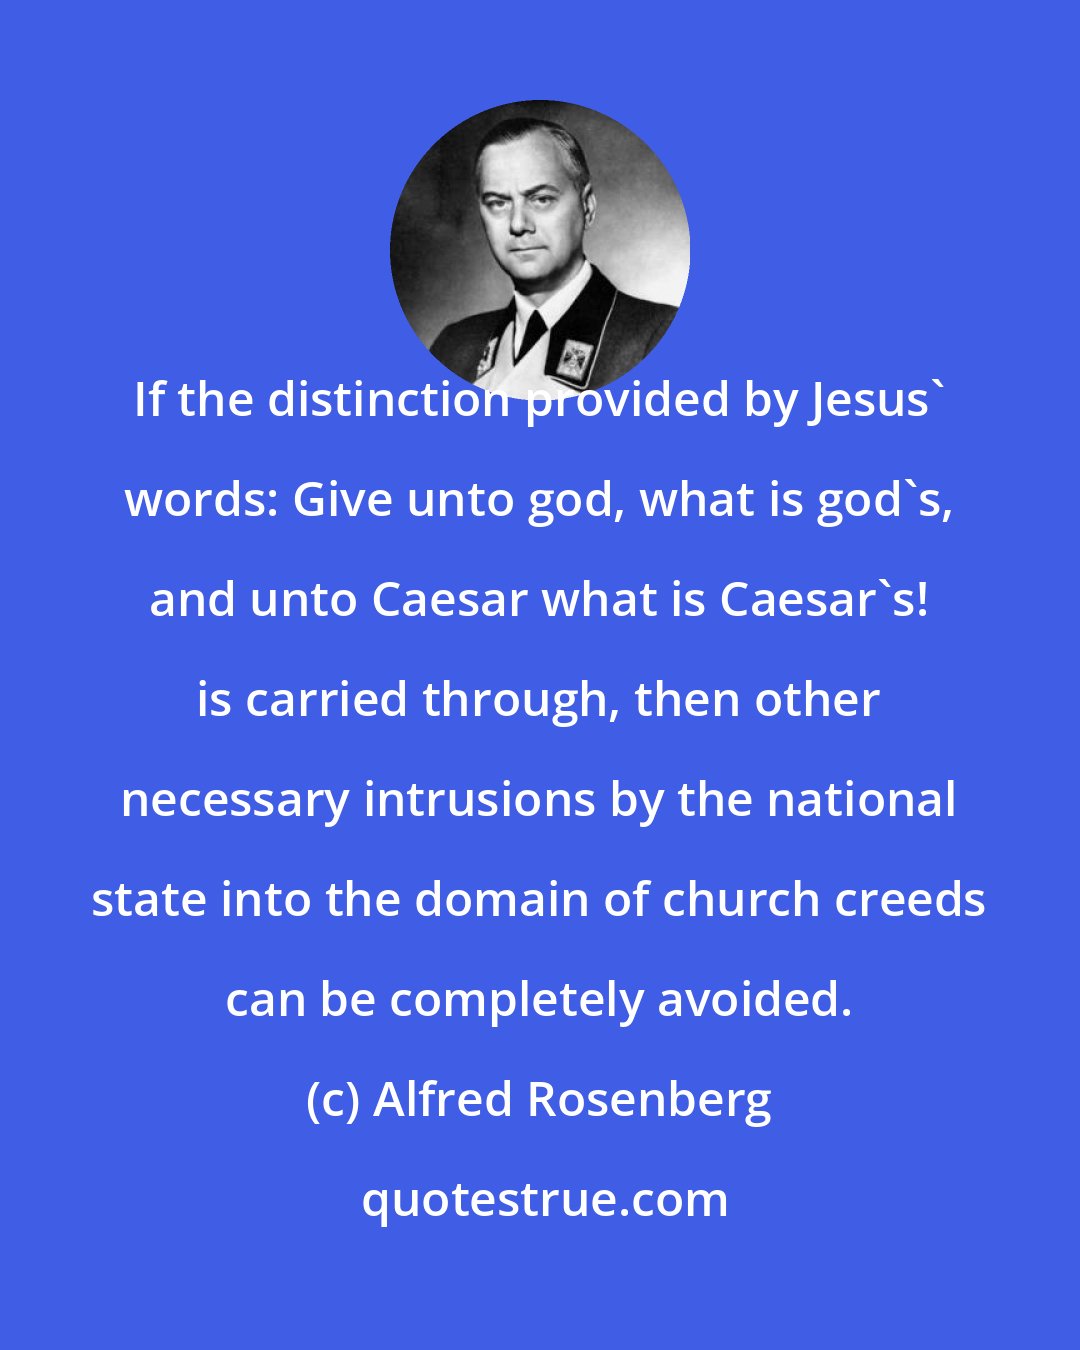 Alfred Rosenberg: If the distinction provided by Jesus' words: Give unto god, what is god's, and unto Caesar what is Caesar's! is carried through, then other necessary intrusions by the national state into the domain of church creeds can be completely avoided.